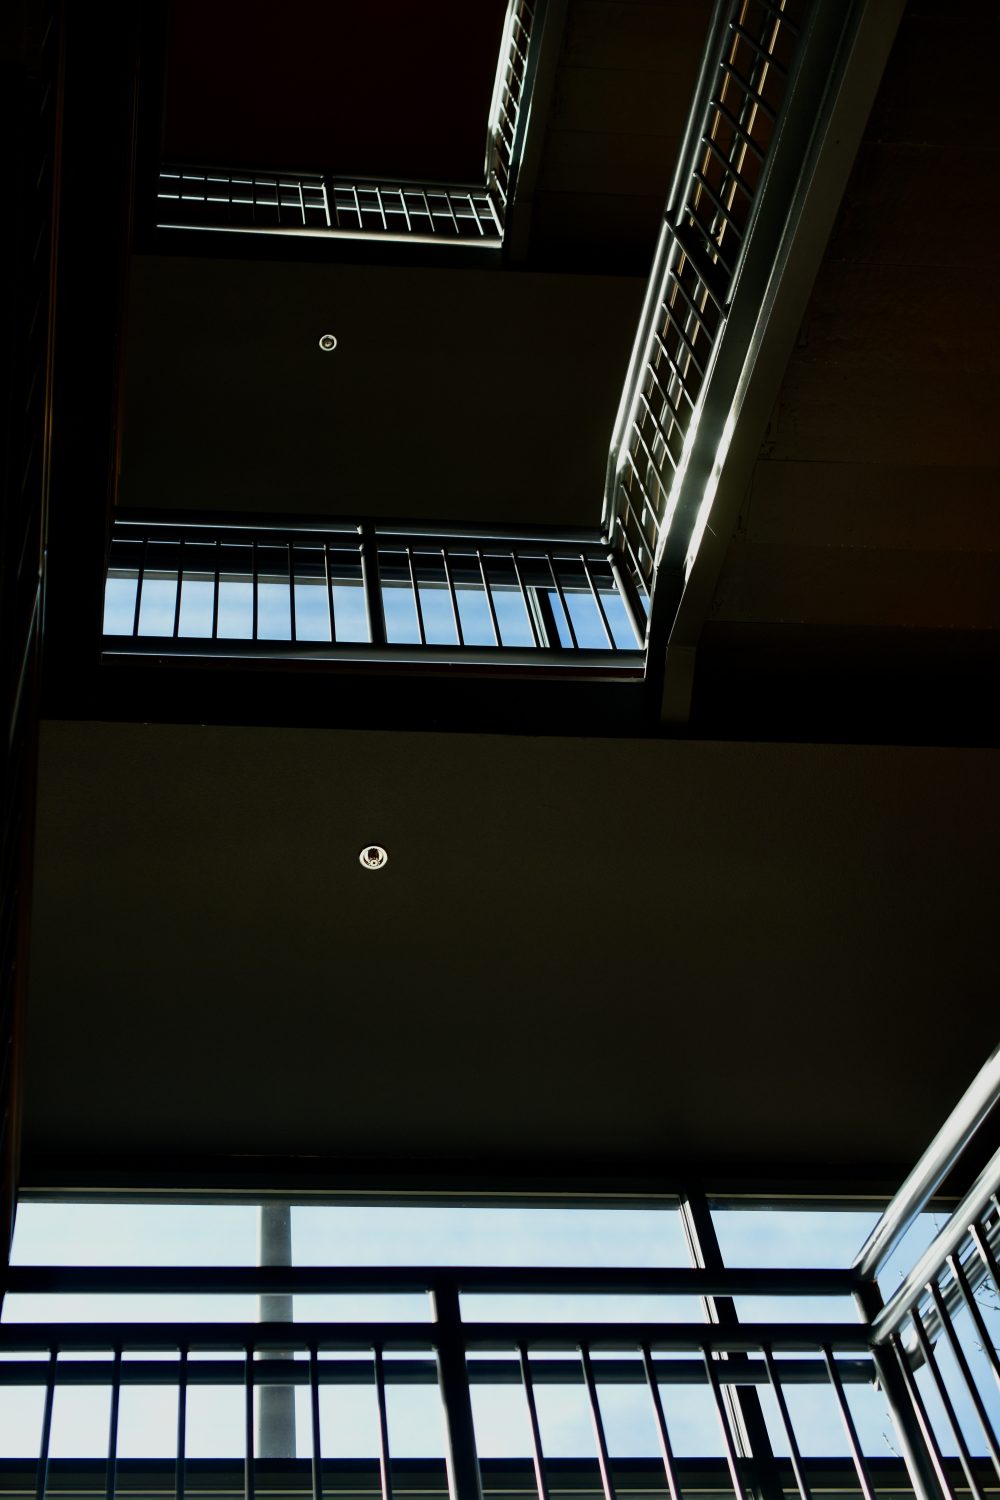 A photograph featuring light coming through a large window and shining on a staircase that goes up several flights in the inside of a building. the railing is highlighted along with a couple of recessed light fixtures on the level of each floor going up. the colors are steel gray and some white with blue sky showing through the window.